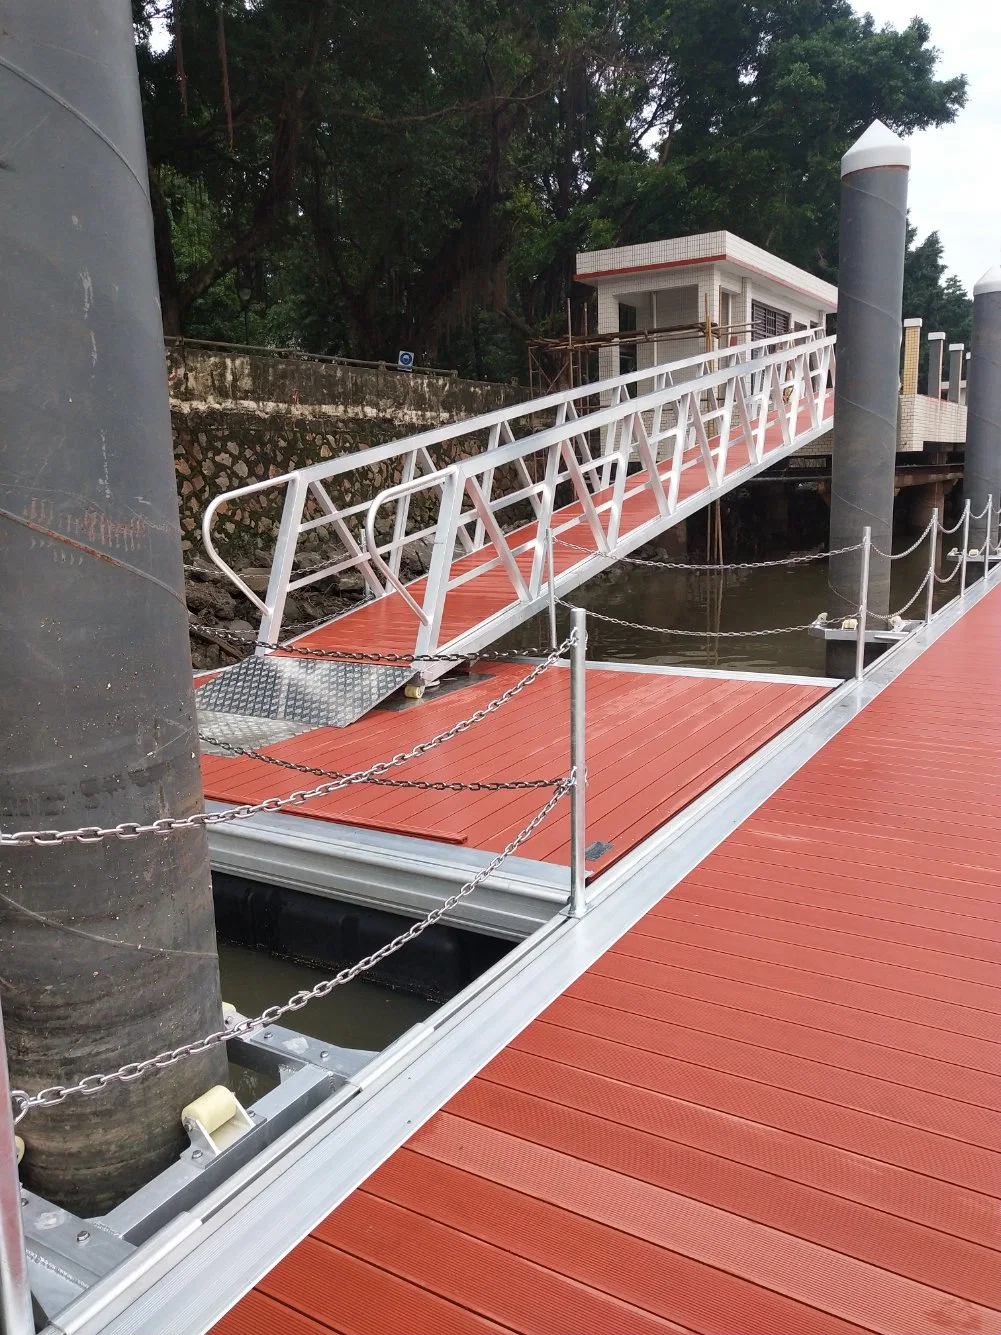 PE Float for Steel Aluminum Dock with Decking